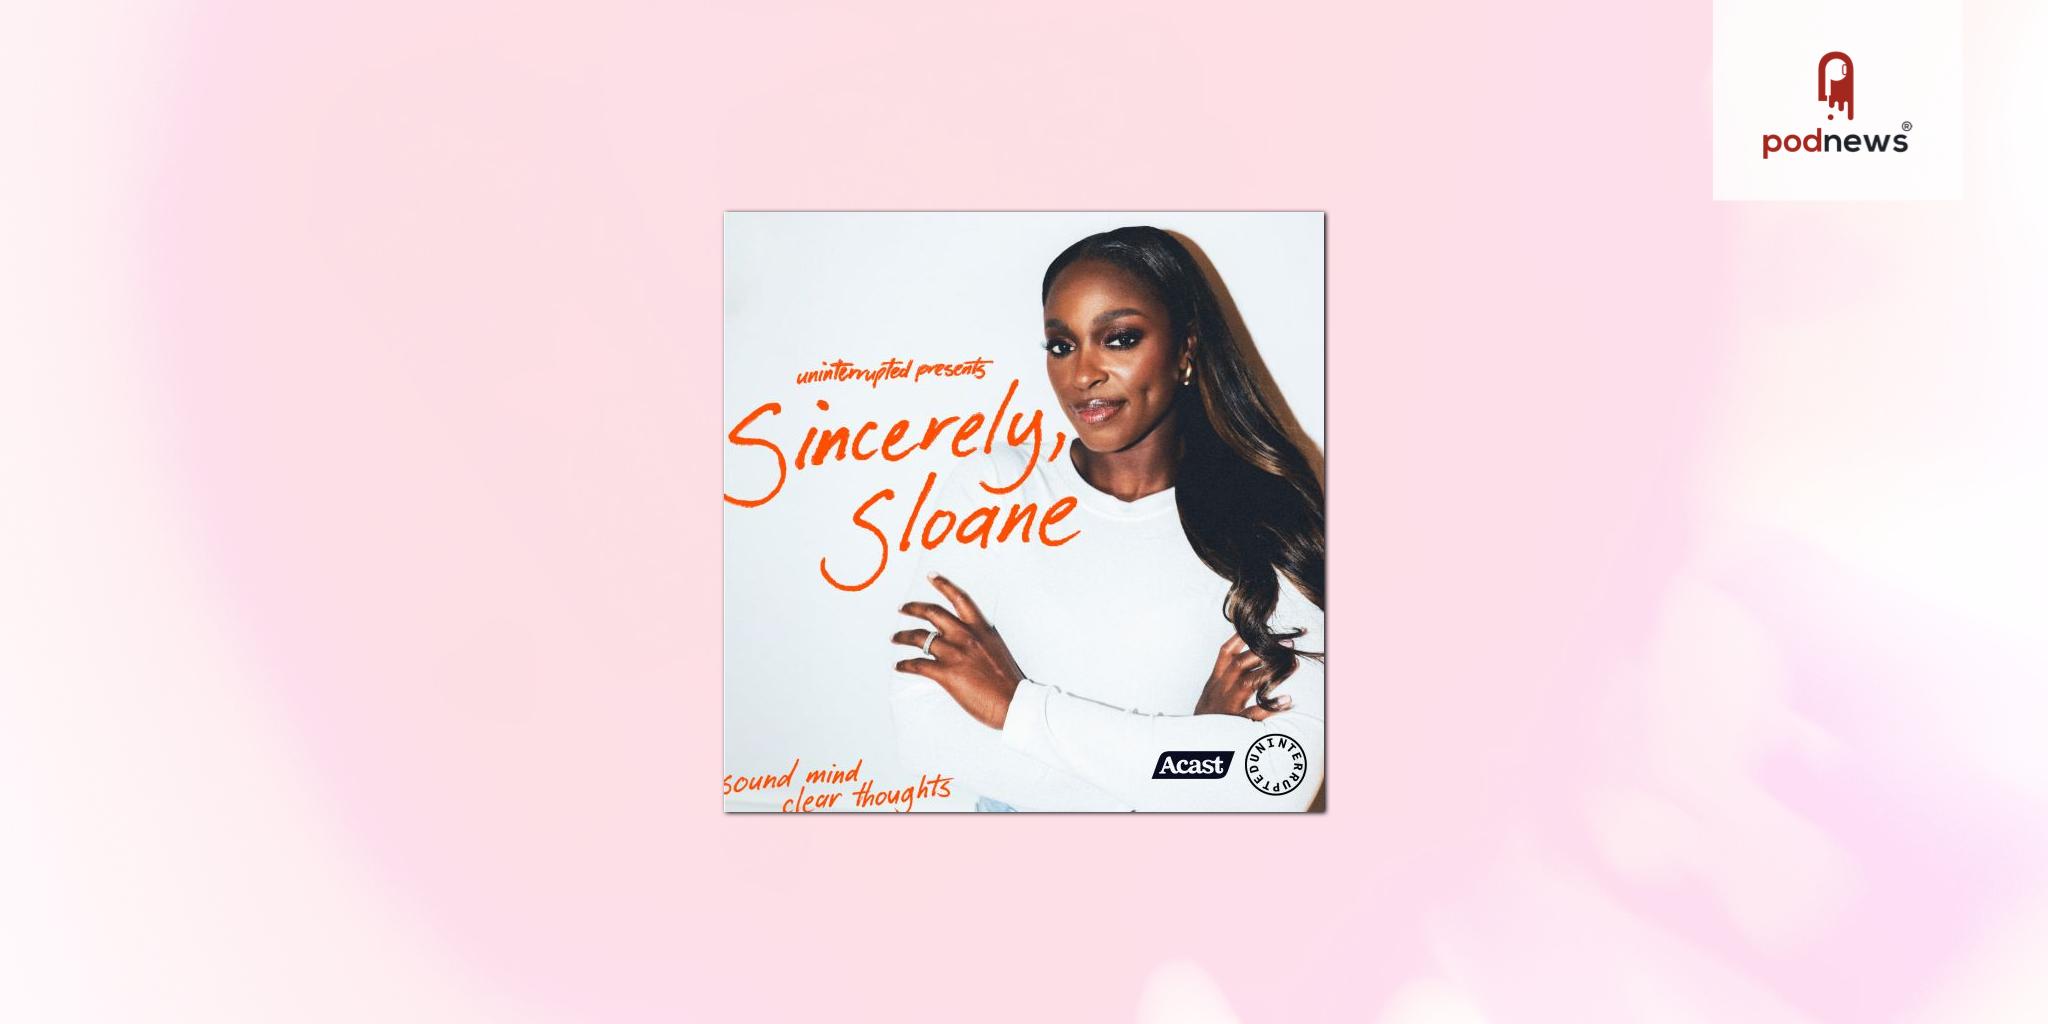 UNINTERRUPTED, in Partnership with Acast, Launches Sincerely, Sloane Podcast with Sloane Stephens